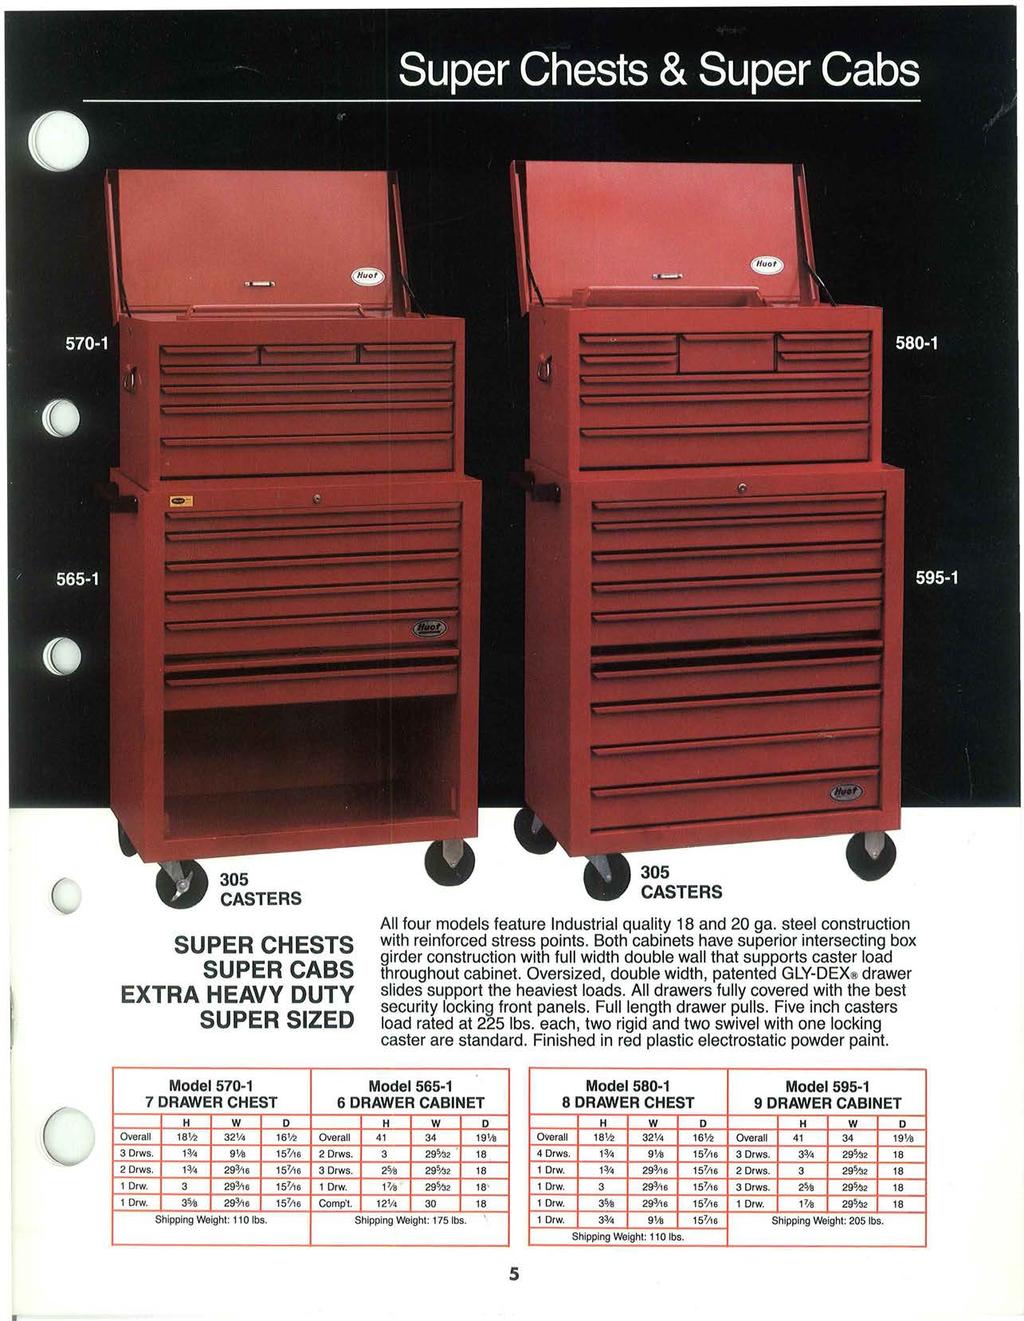 SUPER CHESTS SUPER CABS EXTRA HEAVY DUTY SUPER SIZED All four models feature Industrial quality 18 and 20 ga. steel construction with reinforced stress points.